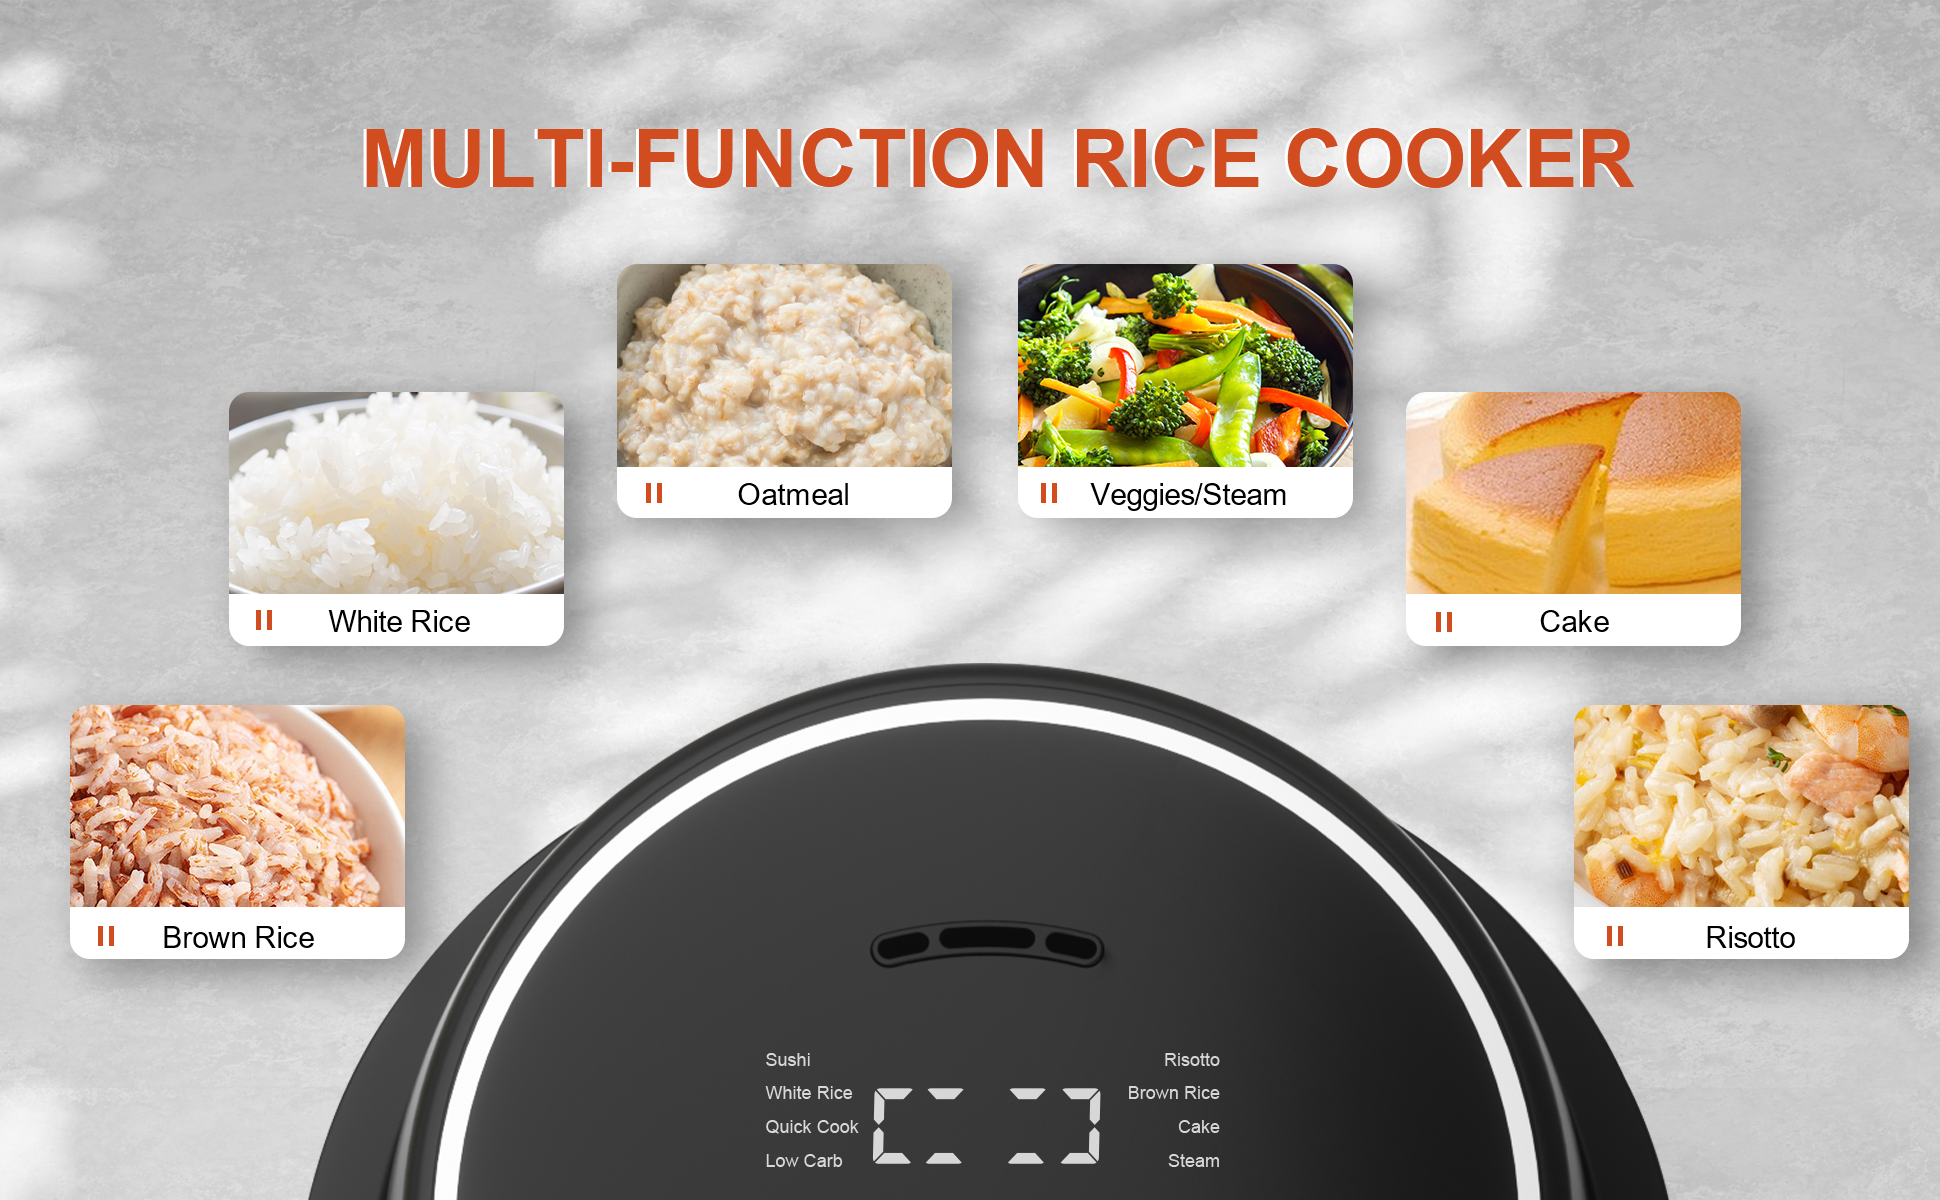 Rice Cooker Small Low Carb, YOKEKON 3 cup uncook Rice Cooker with